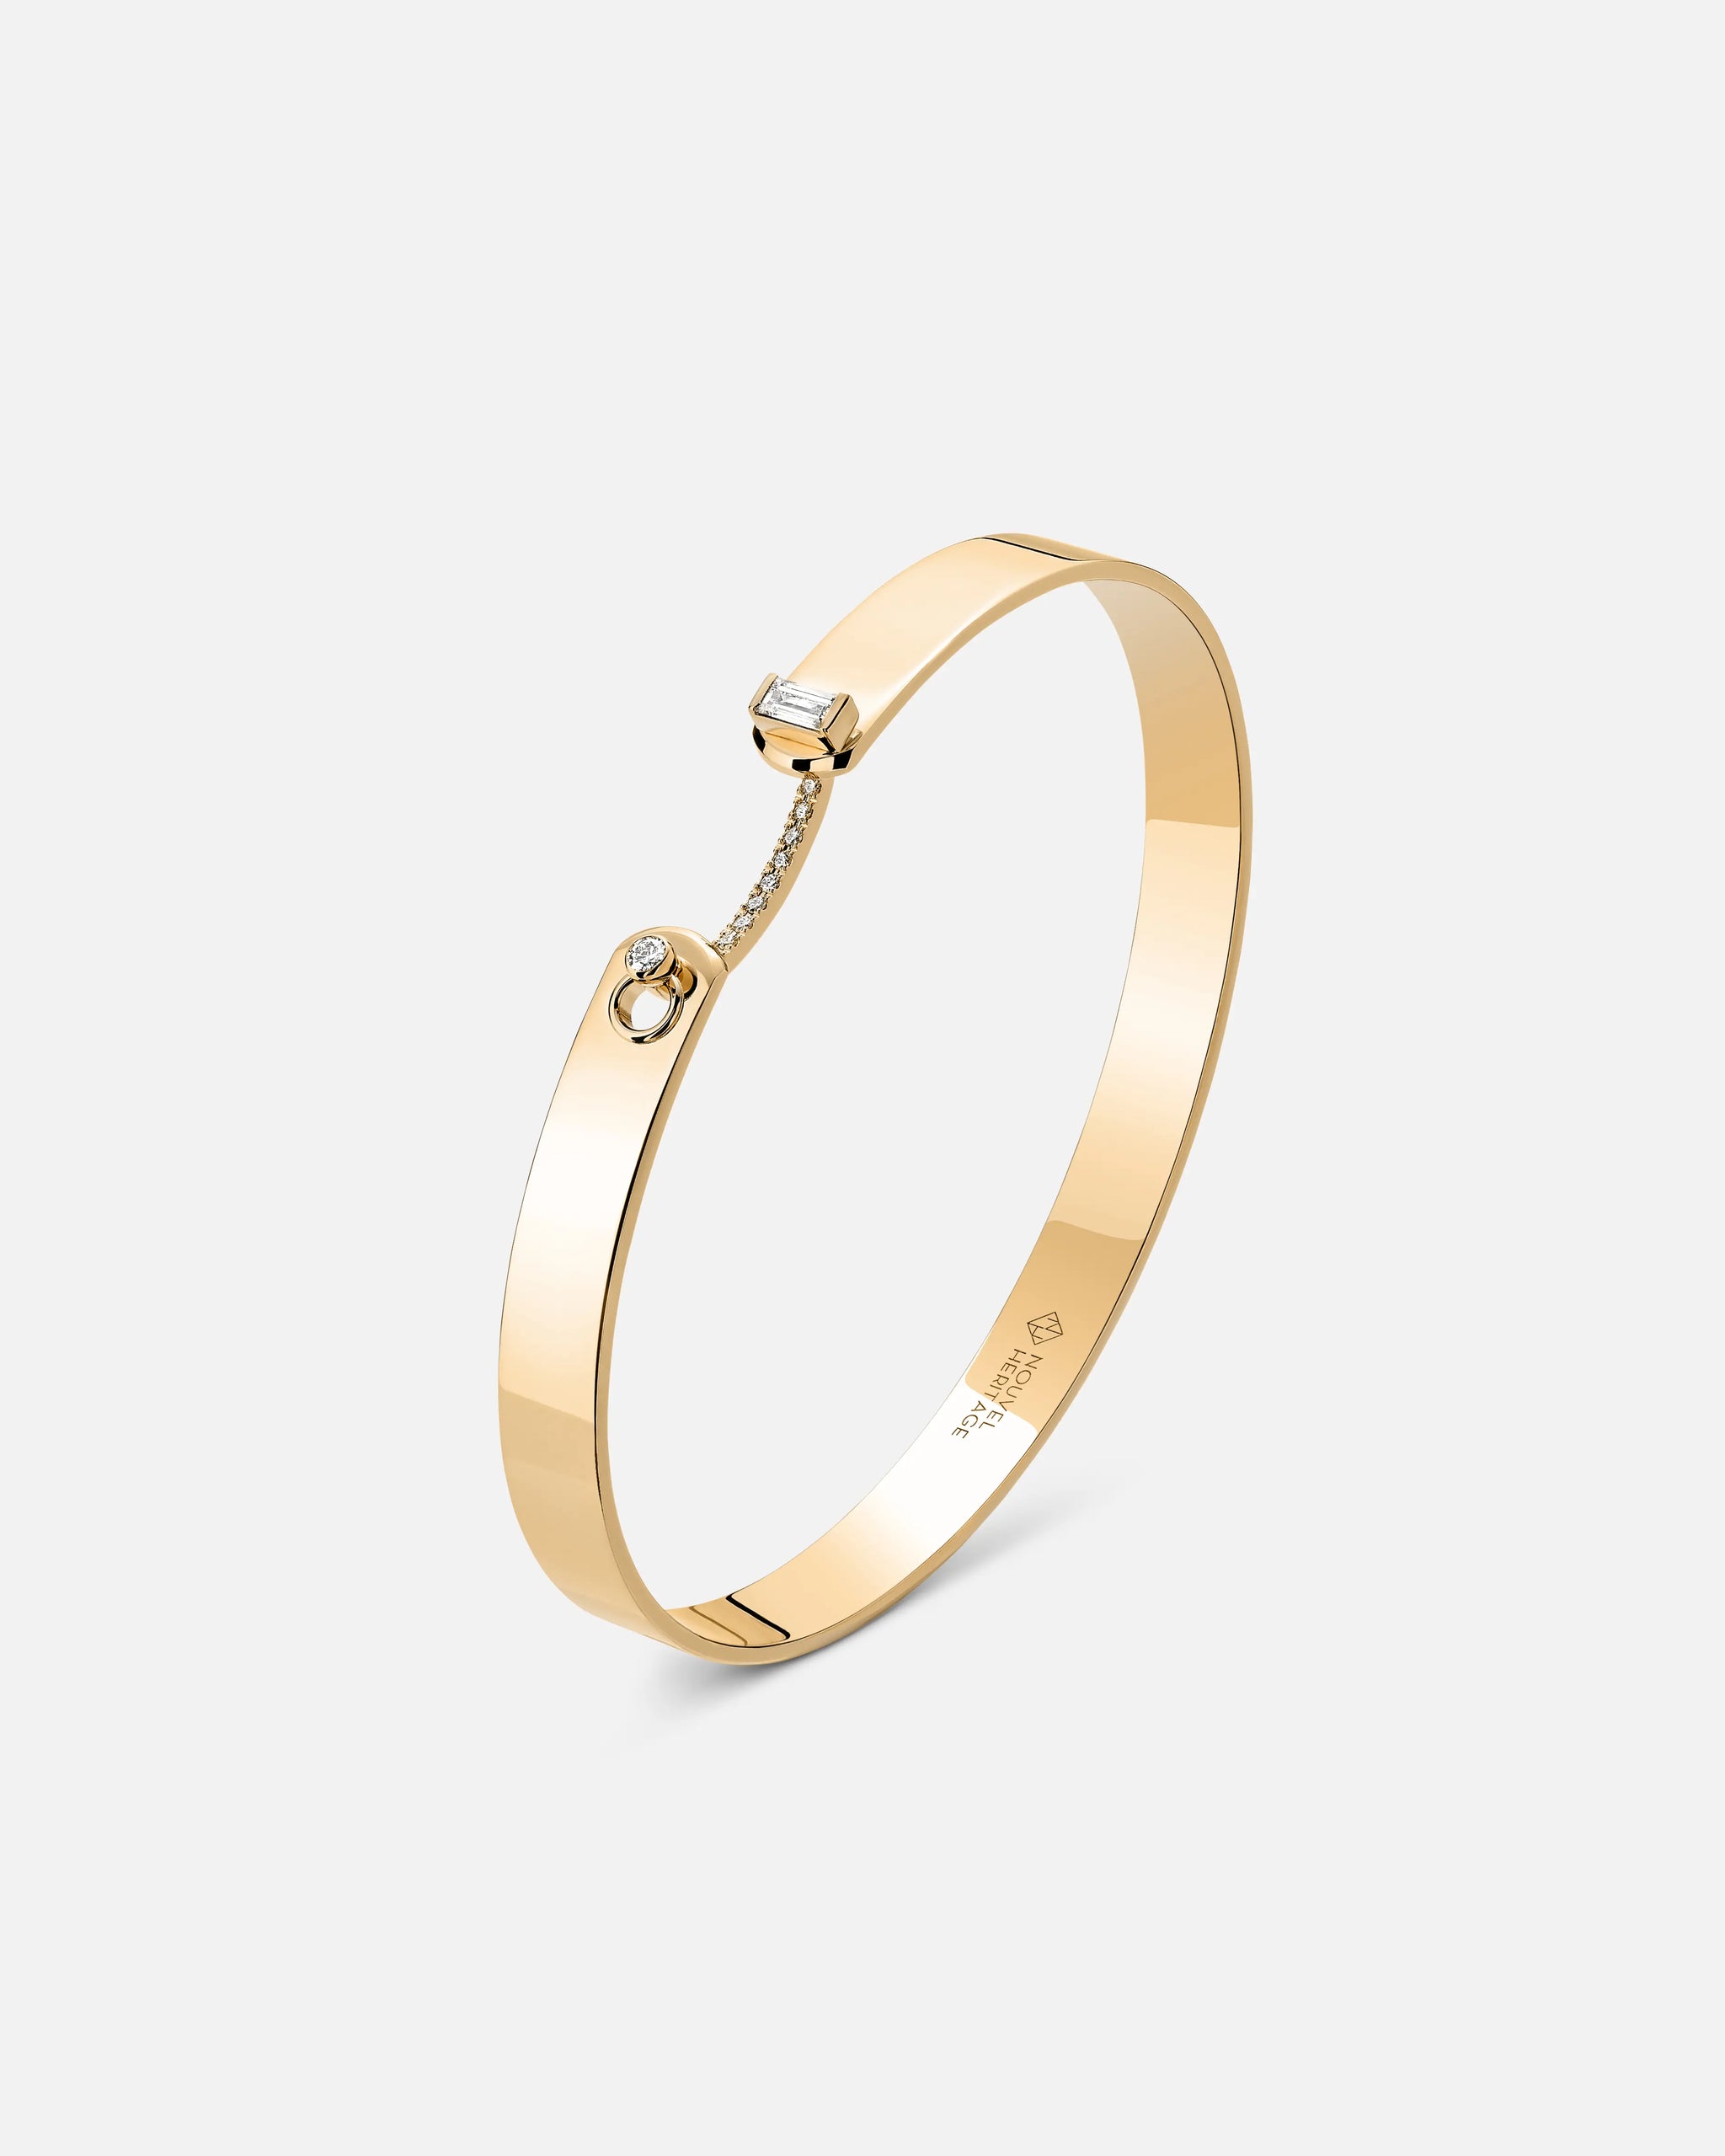 Dinner Date GM Mood Bangle in Yellow Gold - 1 - Nouvel Heritage